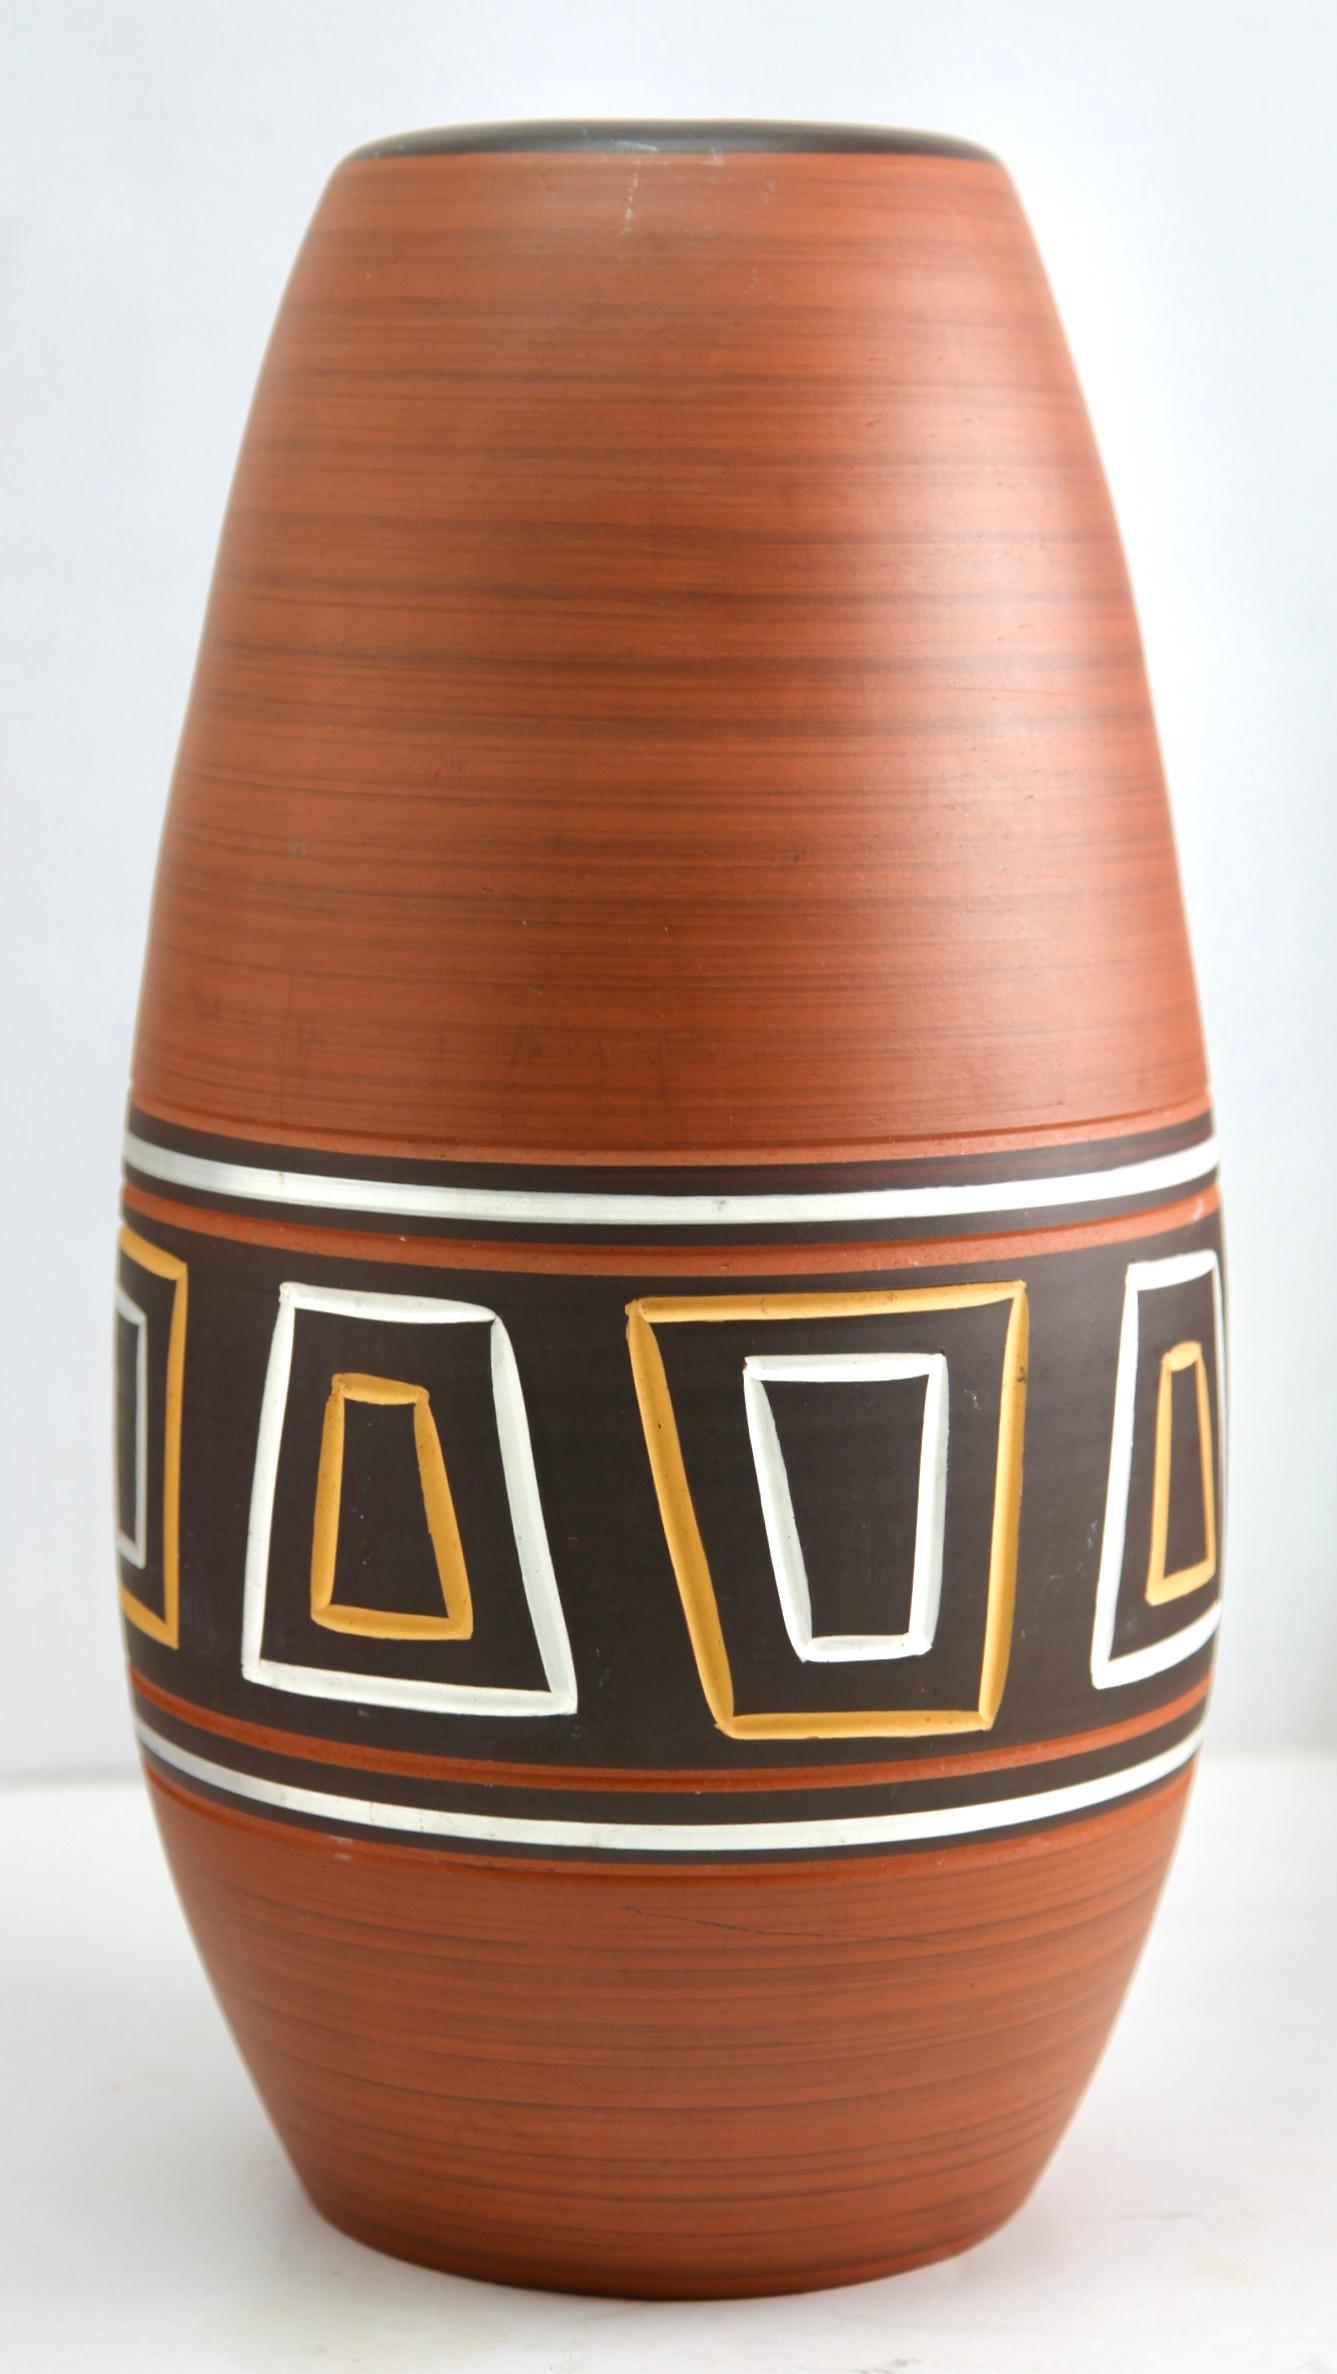 These original vintage vase was produced in the 1970s in Germany. It is made of ceramic pottery.
The bottom are marked the vase series number 45-40 Handarbeit
Straight forward and minimalistic design of the 1960s design era. 
Super rare in this